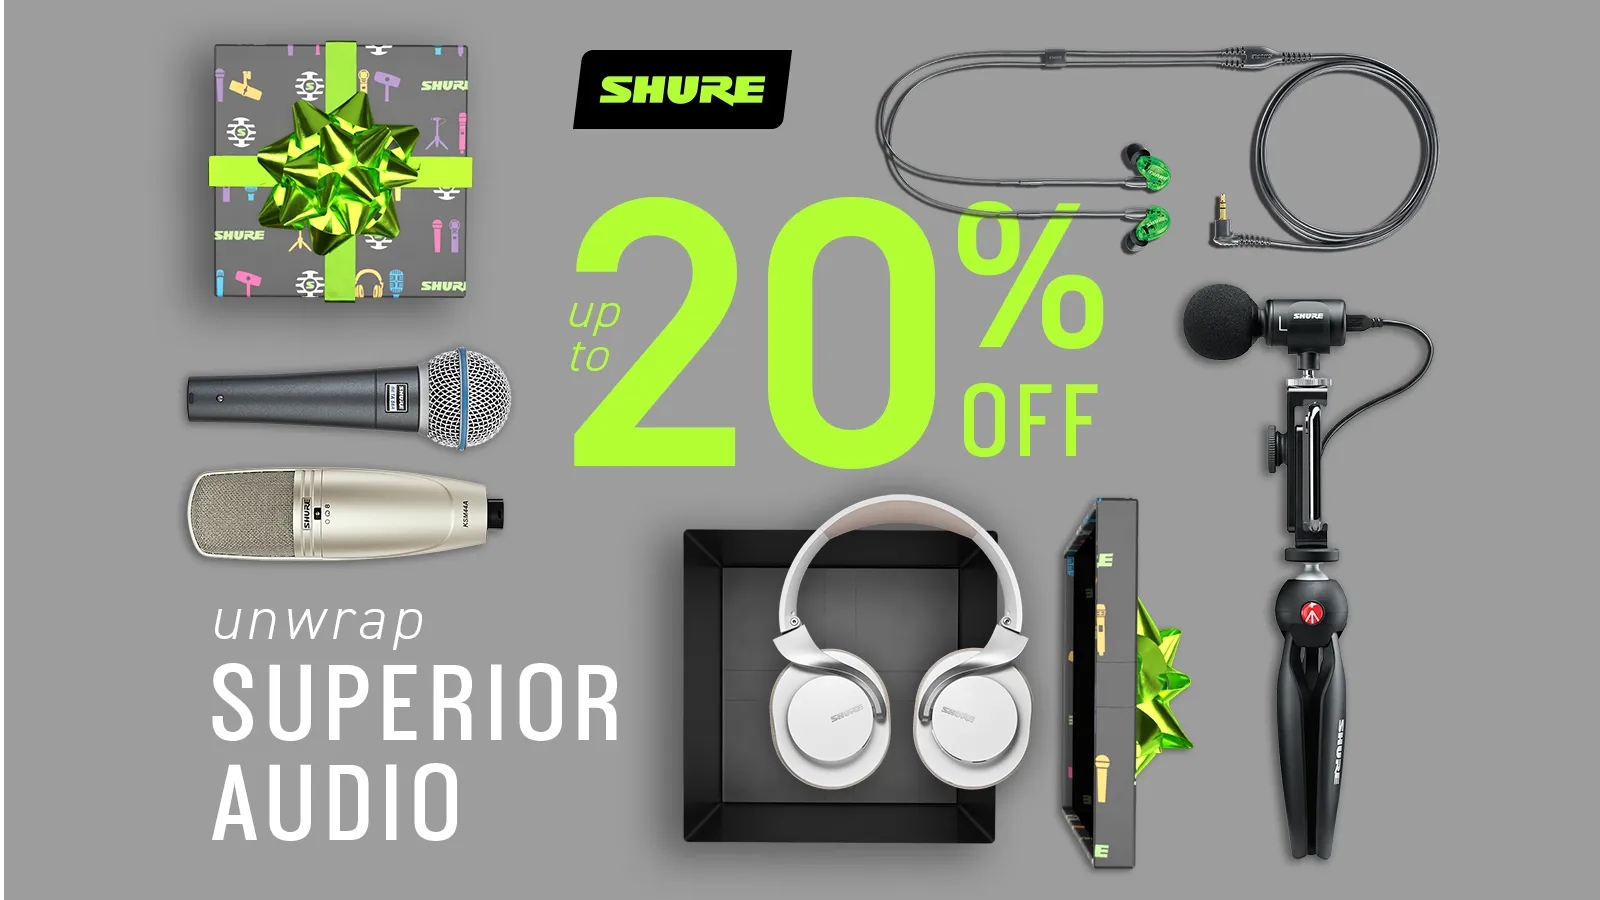 Shure holiday deals